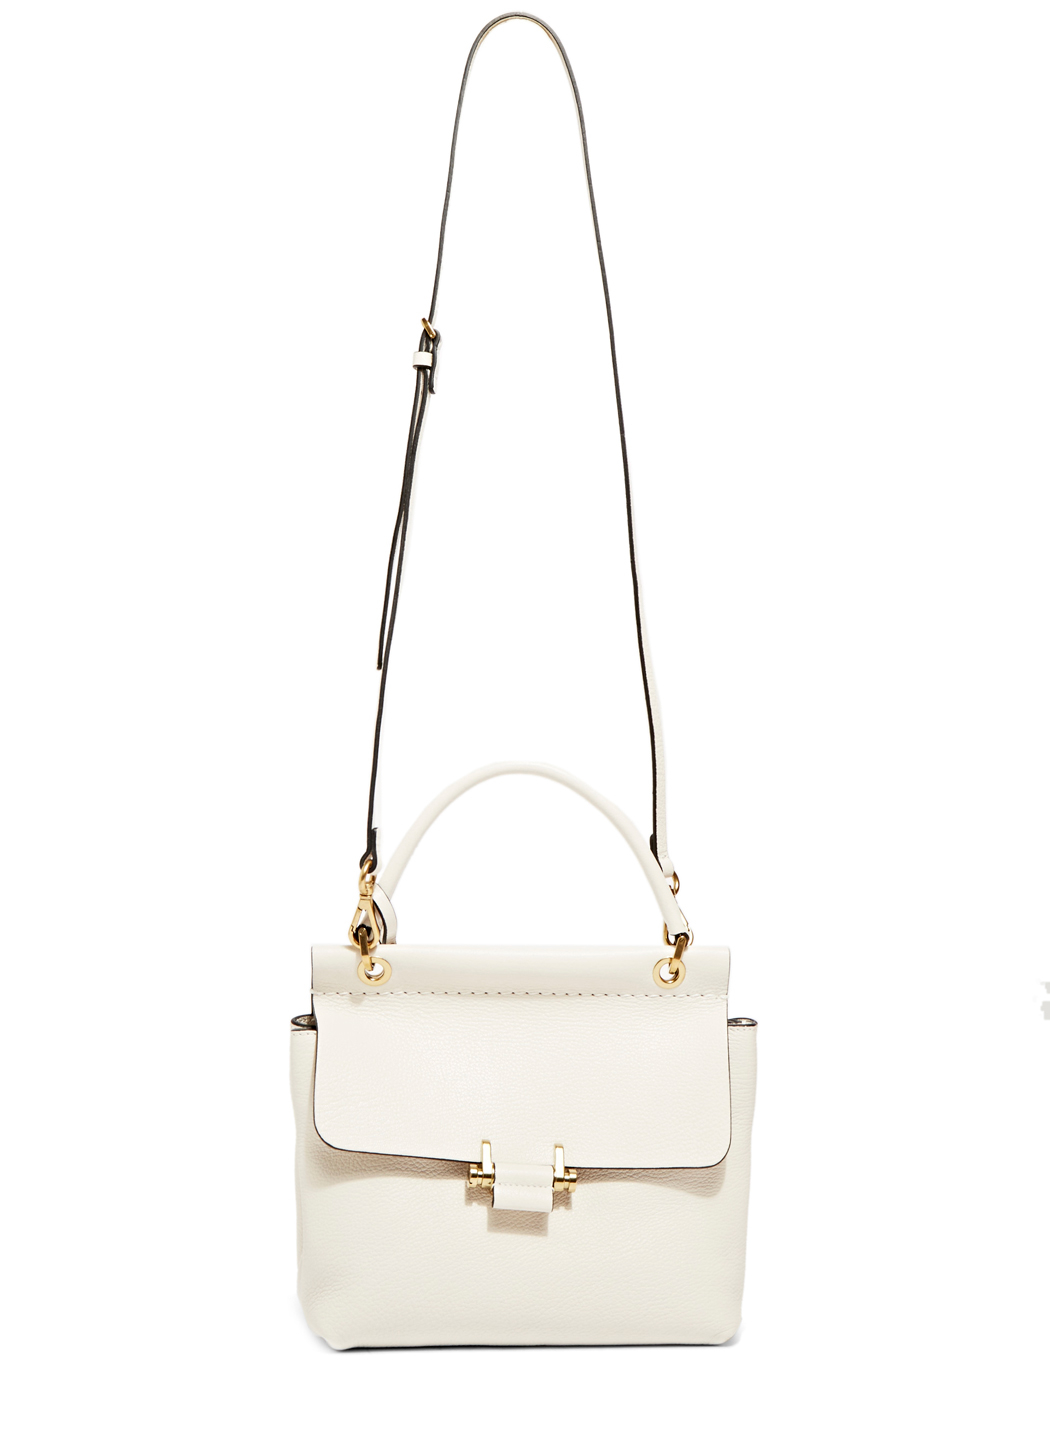 Lanvin Mini Top Handle Leather Bag in White | Lyst